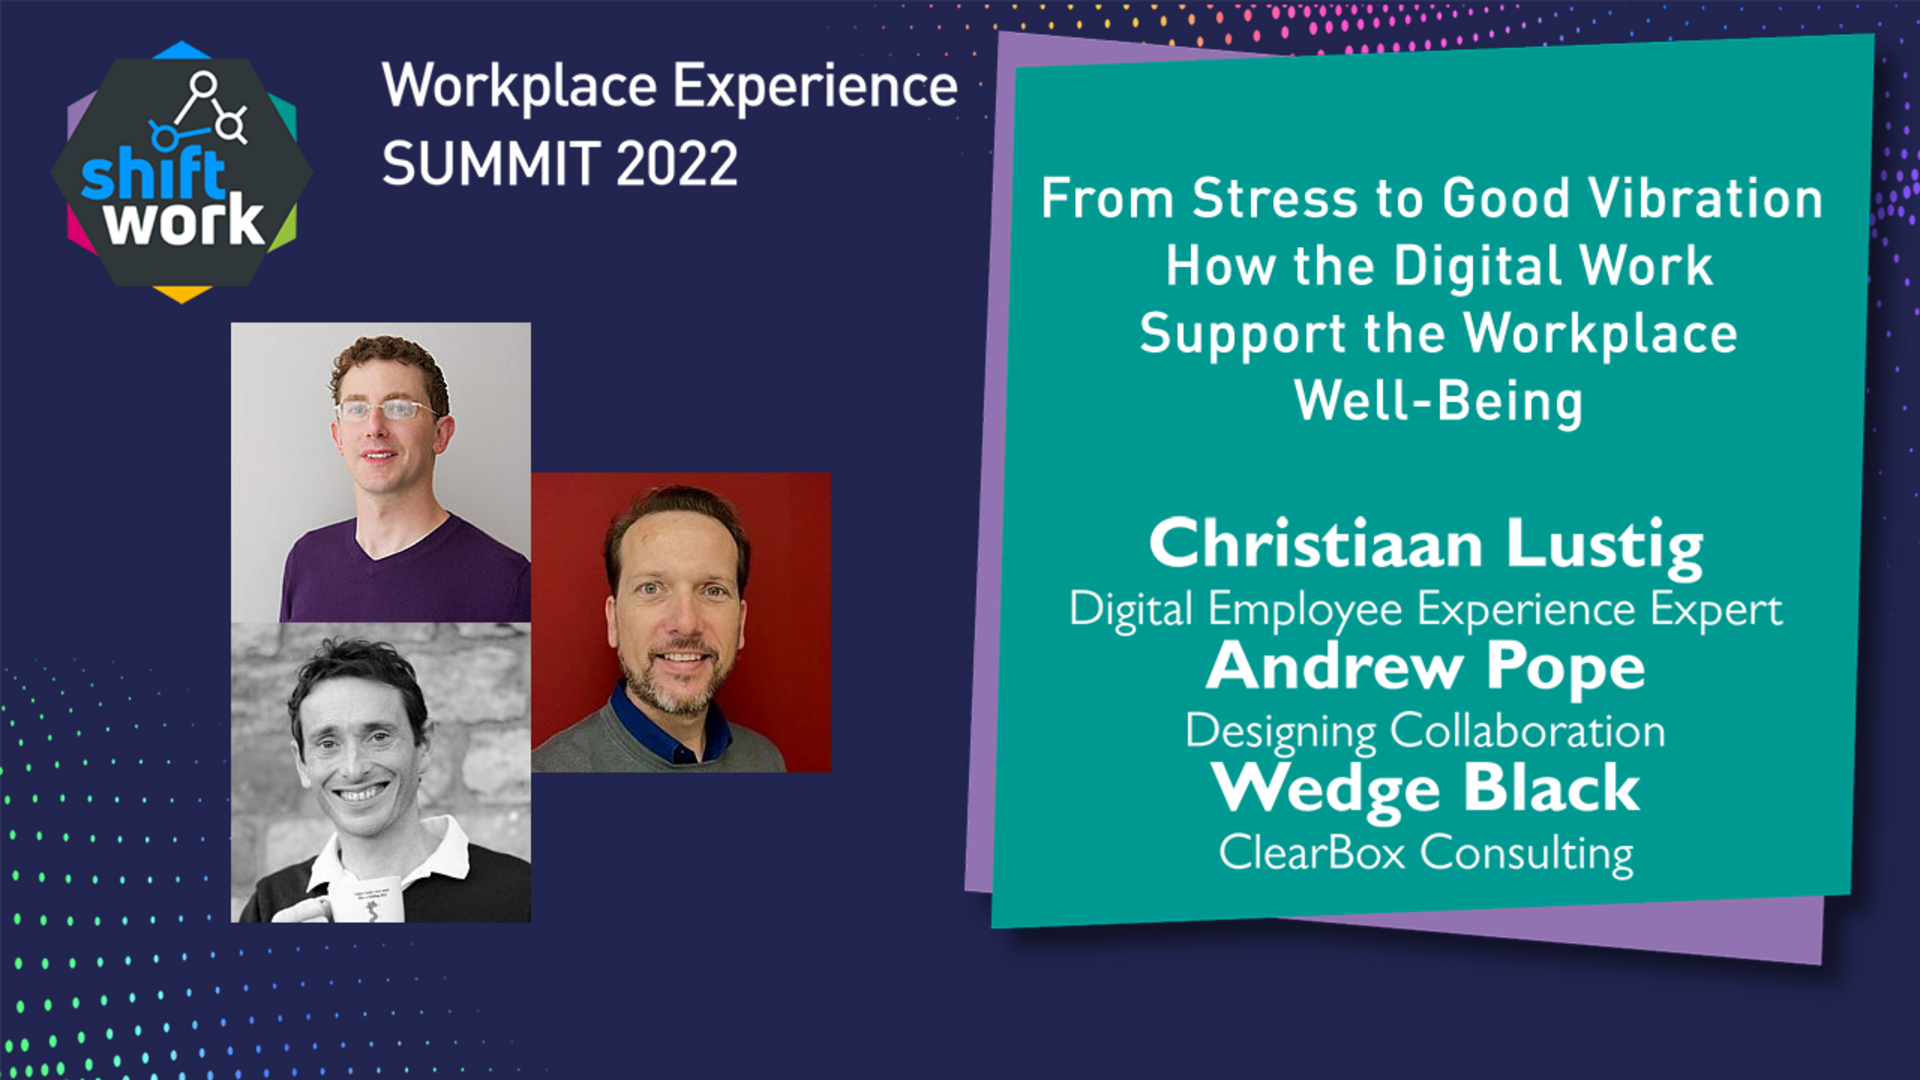 From Stress to Good Vibration - How the Digital Work Support the Workplace Well-Being 